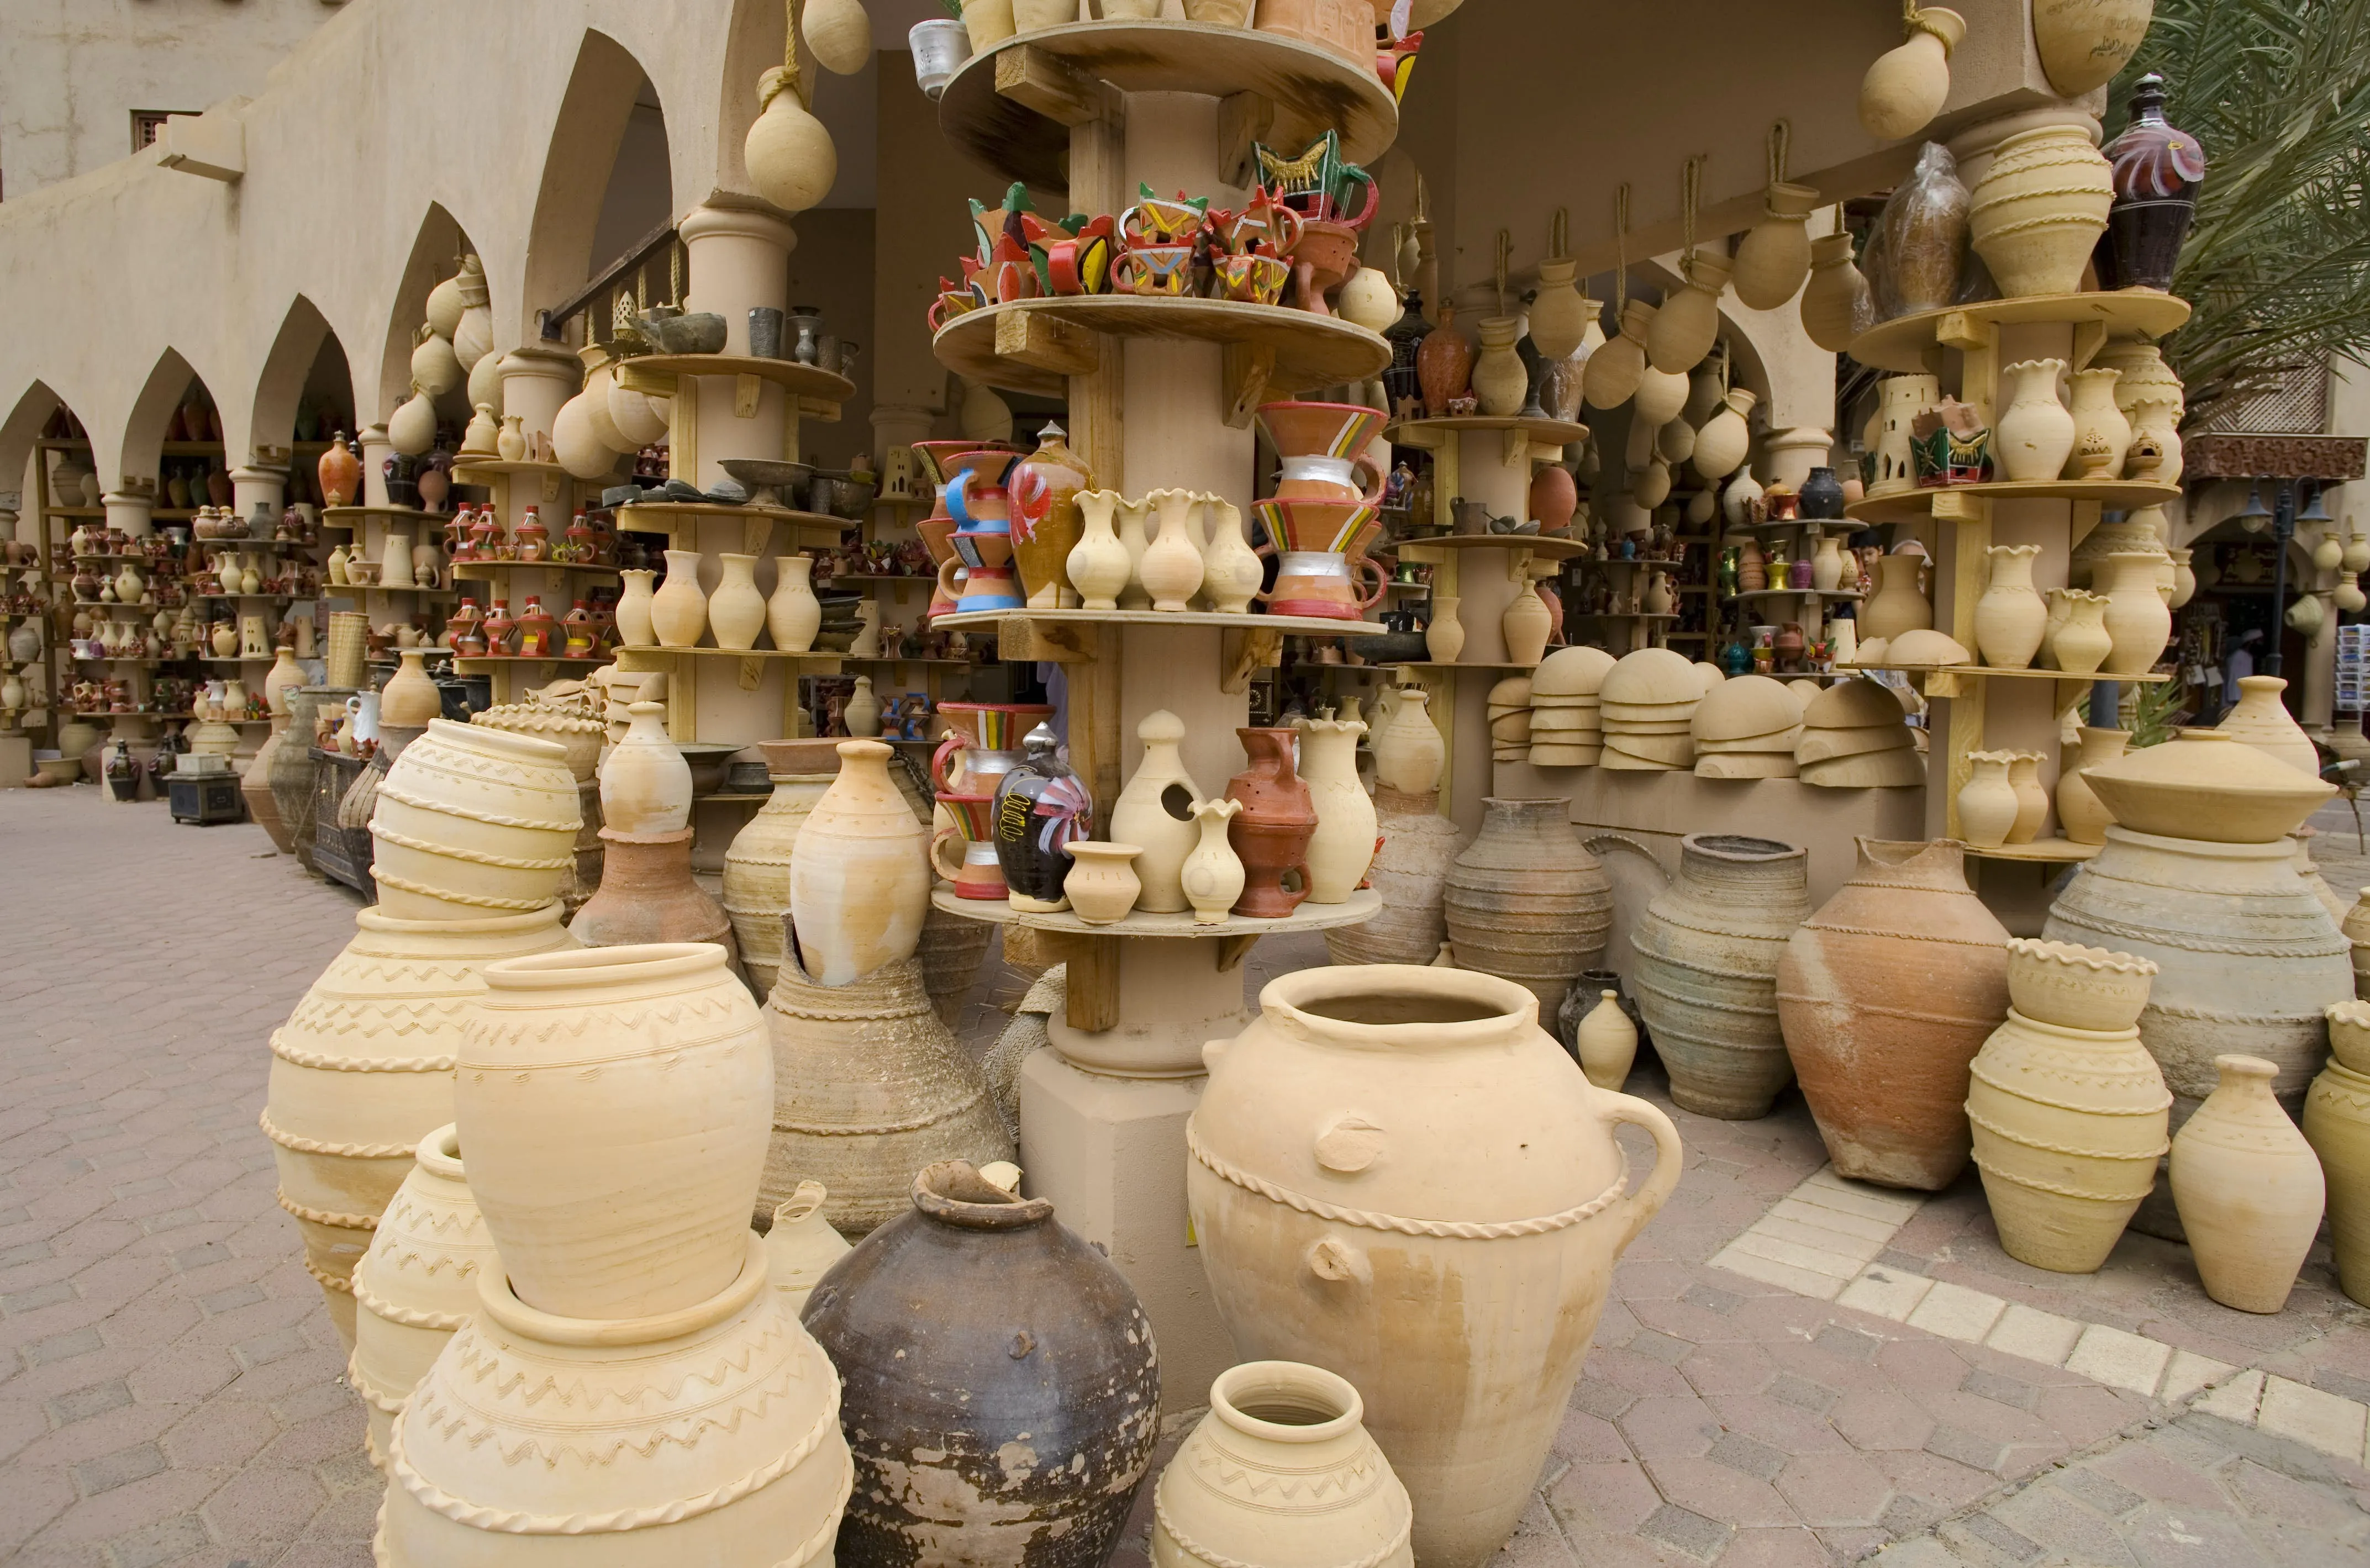 Nizwa Souq in Oman, middle_east | Handbags,Accessories,Clothes,Other Crafts,Handicrafts,Art,Fruit & Vegetable - Country Helper